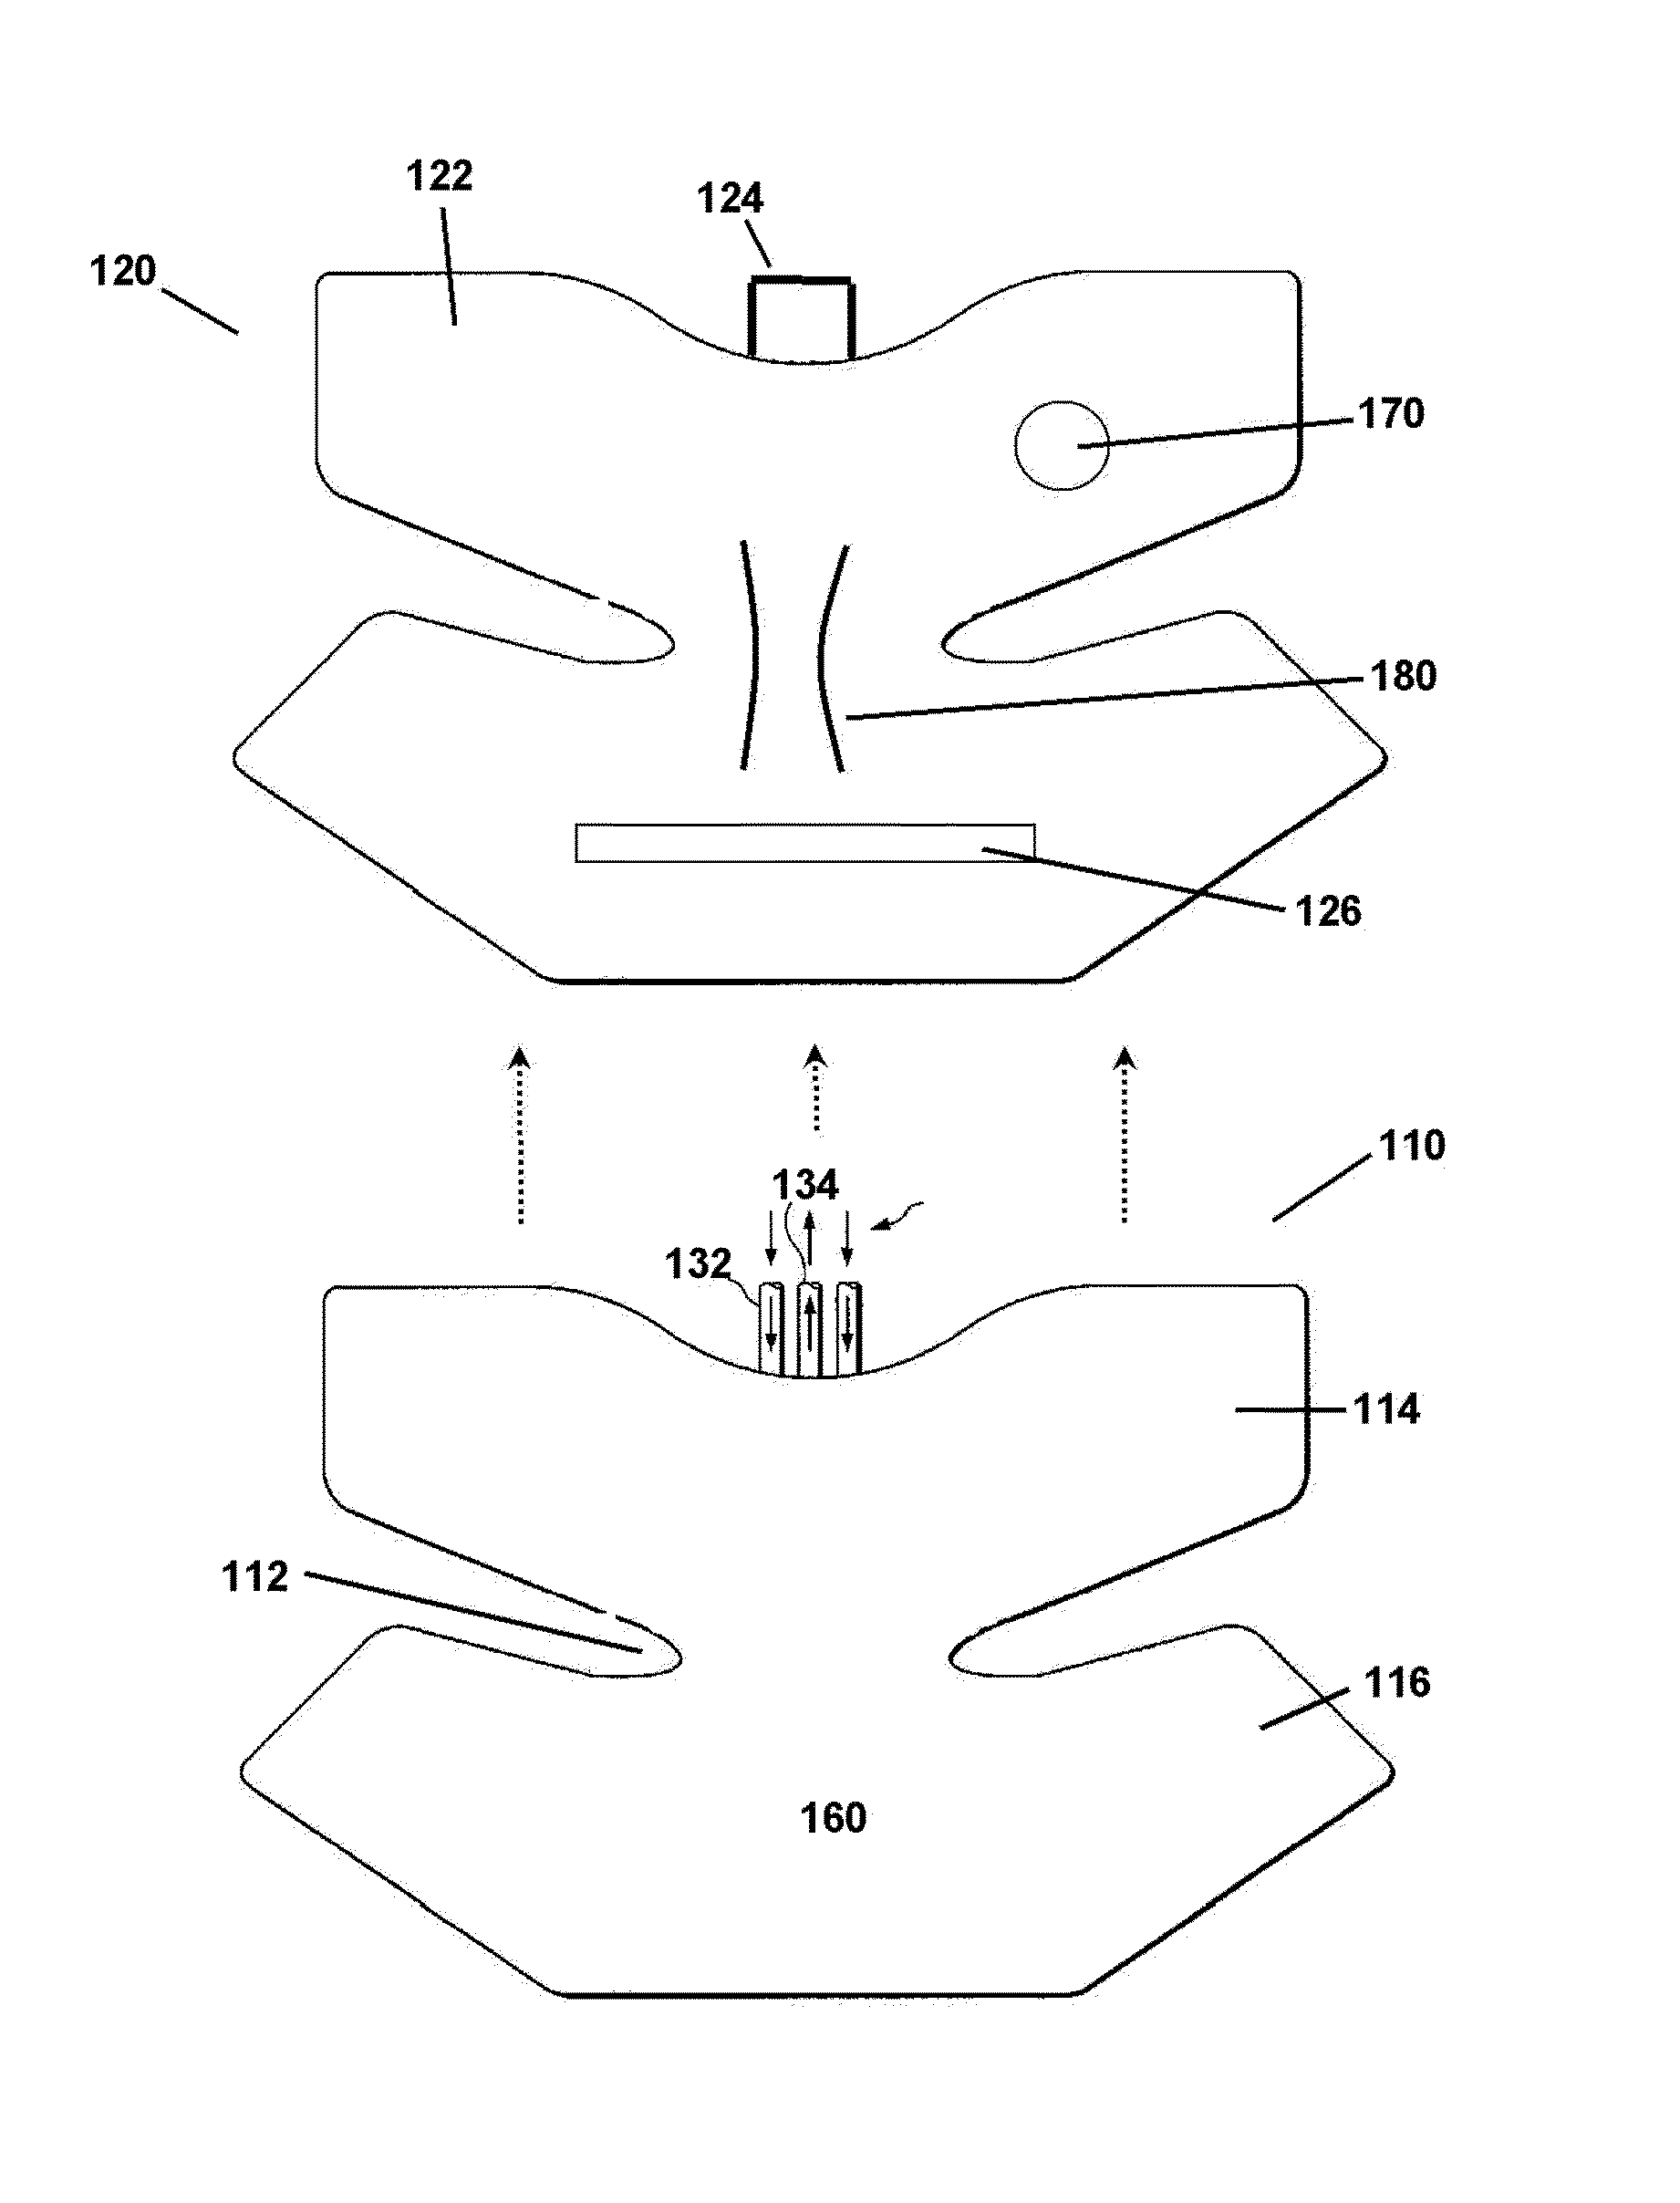 Thermal compression therapy apparatus and system